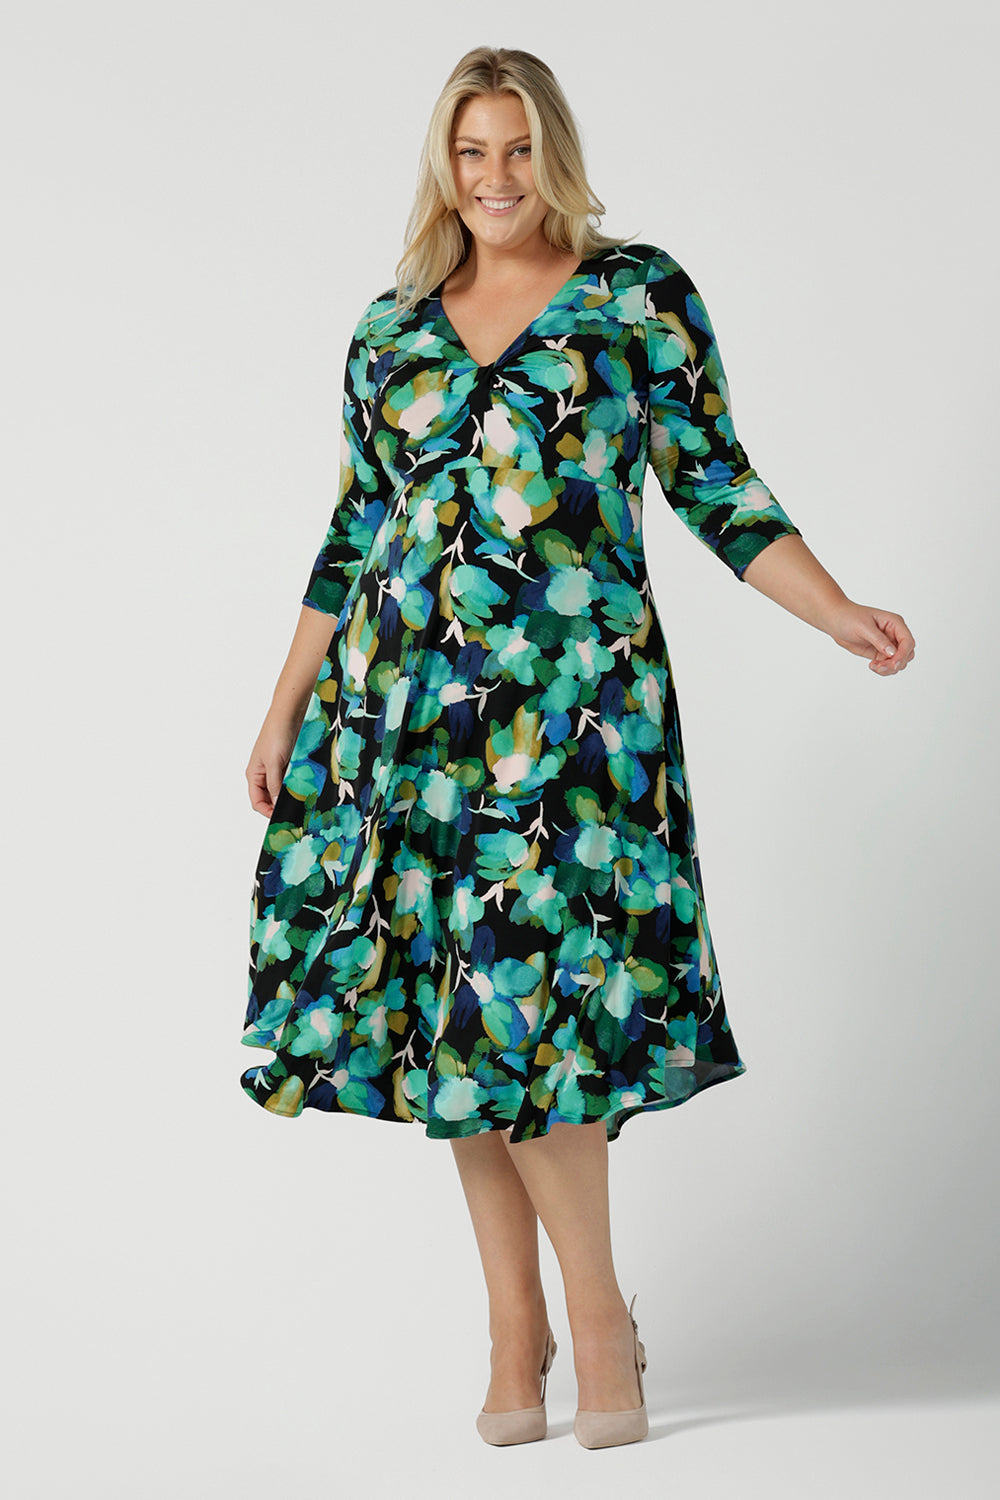 A size 18 woman wears the Kyra dress in Canopy. A twist front dress with a 3/4 sleeve on a watercolour print. Made in Australia for women size 8 - 24. 